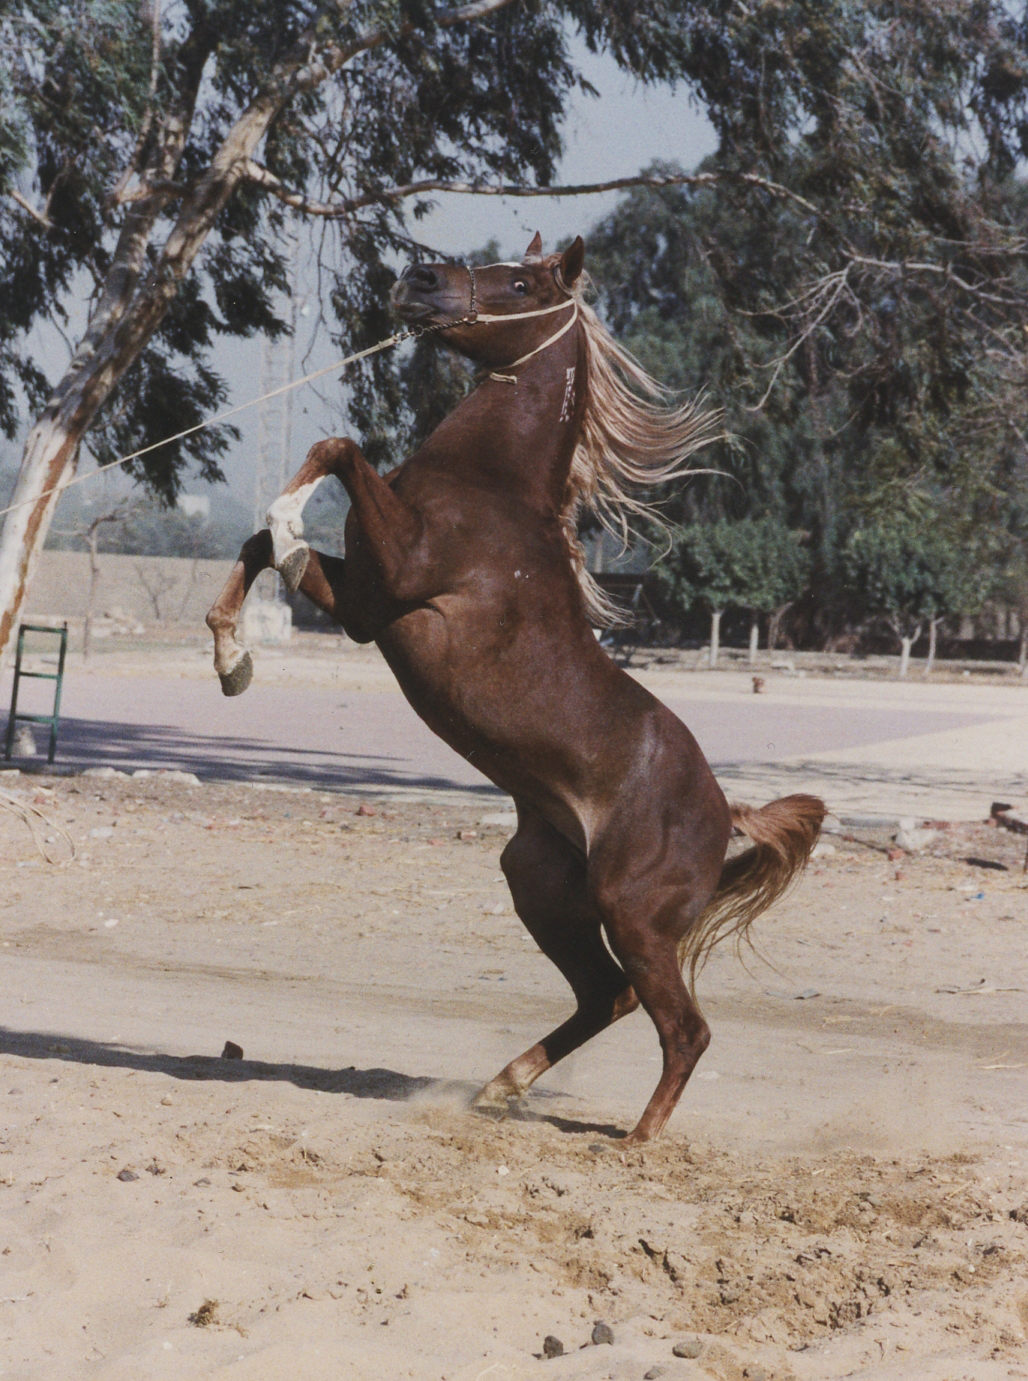 The quality of horses I could have ridden. Photos of Egypt ©1998 Ann James Massey